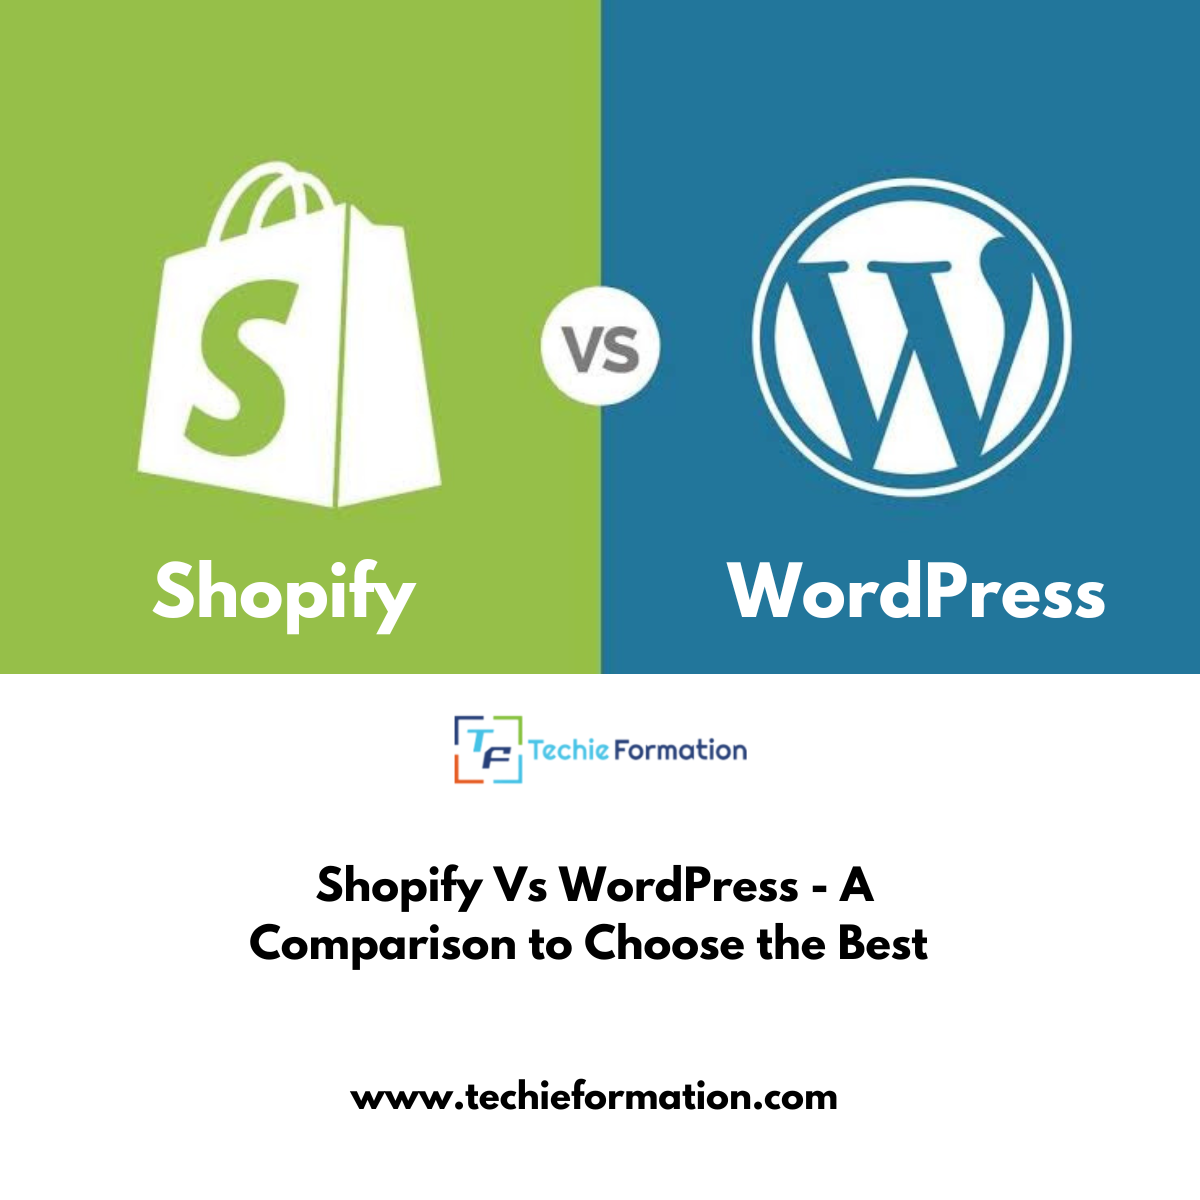 Shopify Vs WordPress - A Comparison to Choose the Best